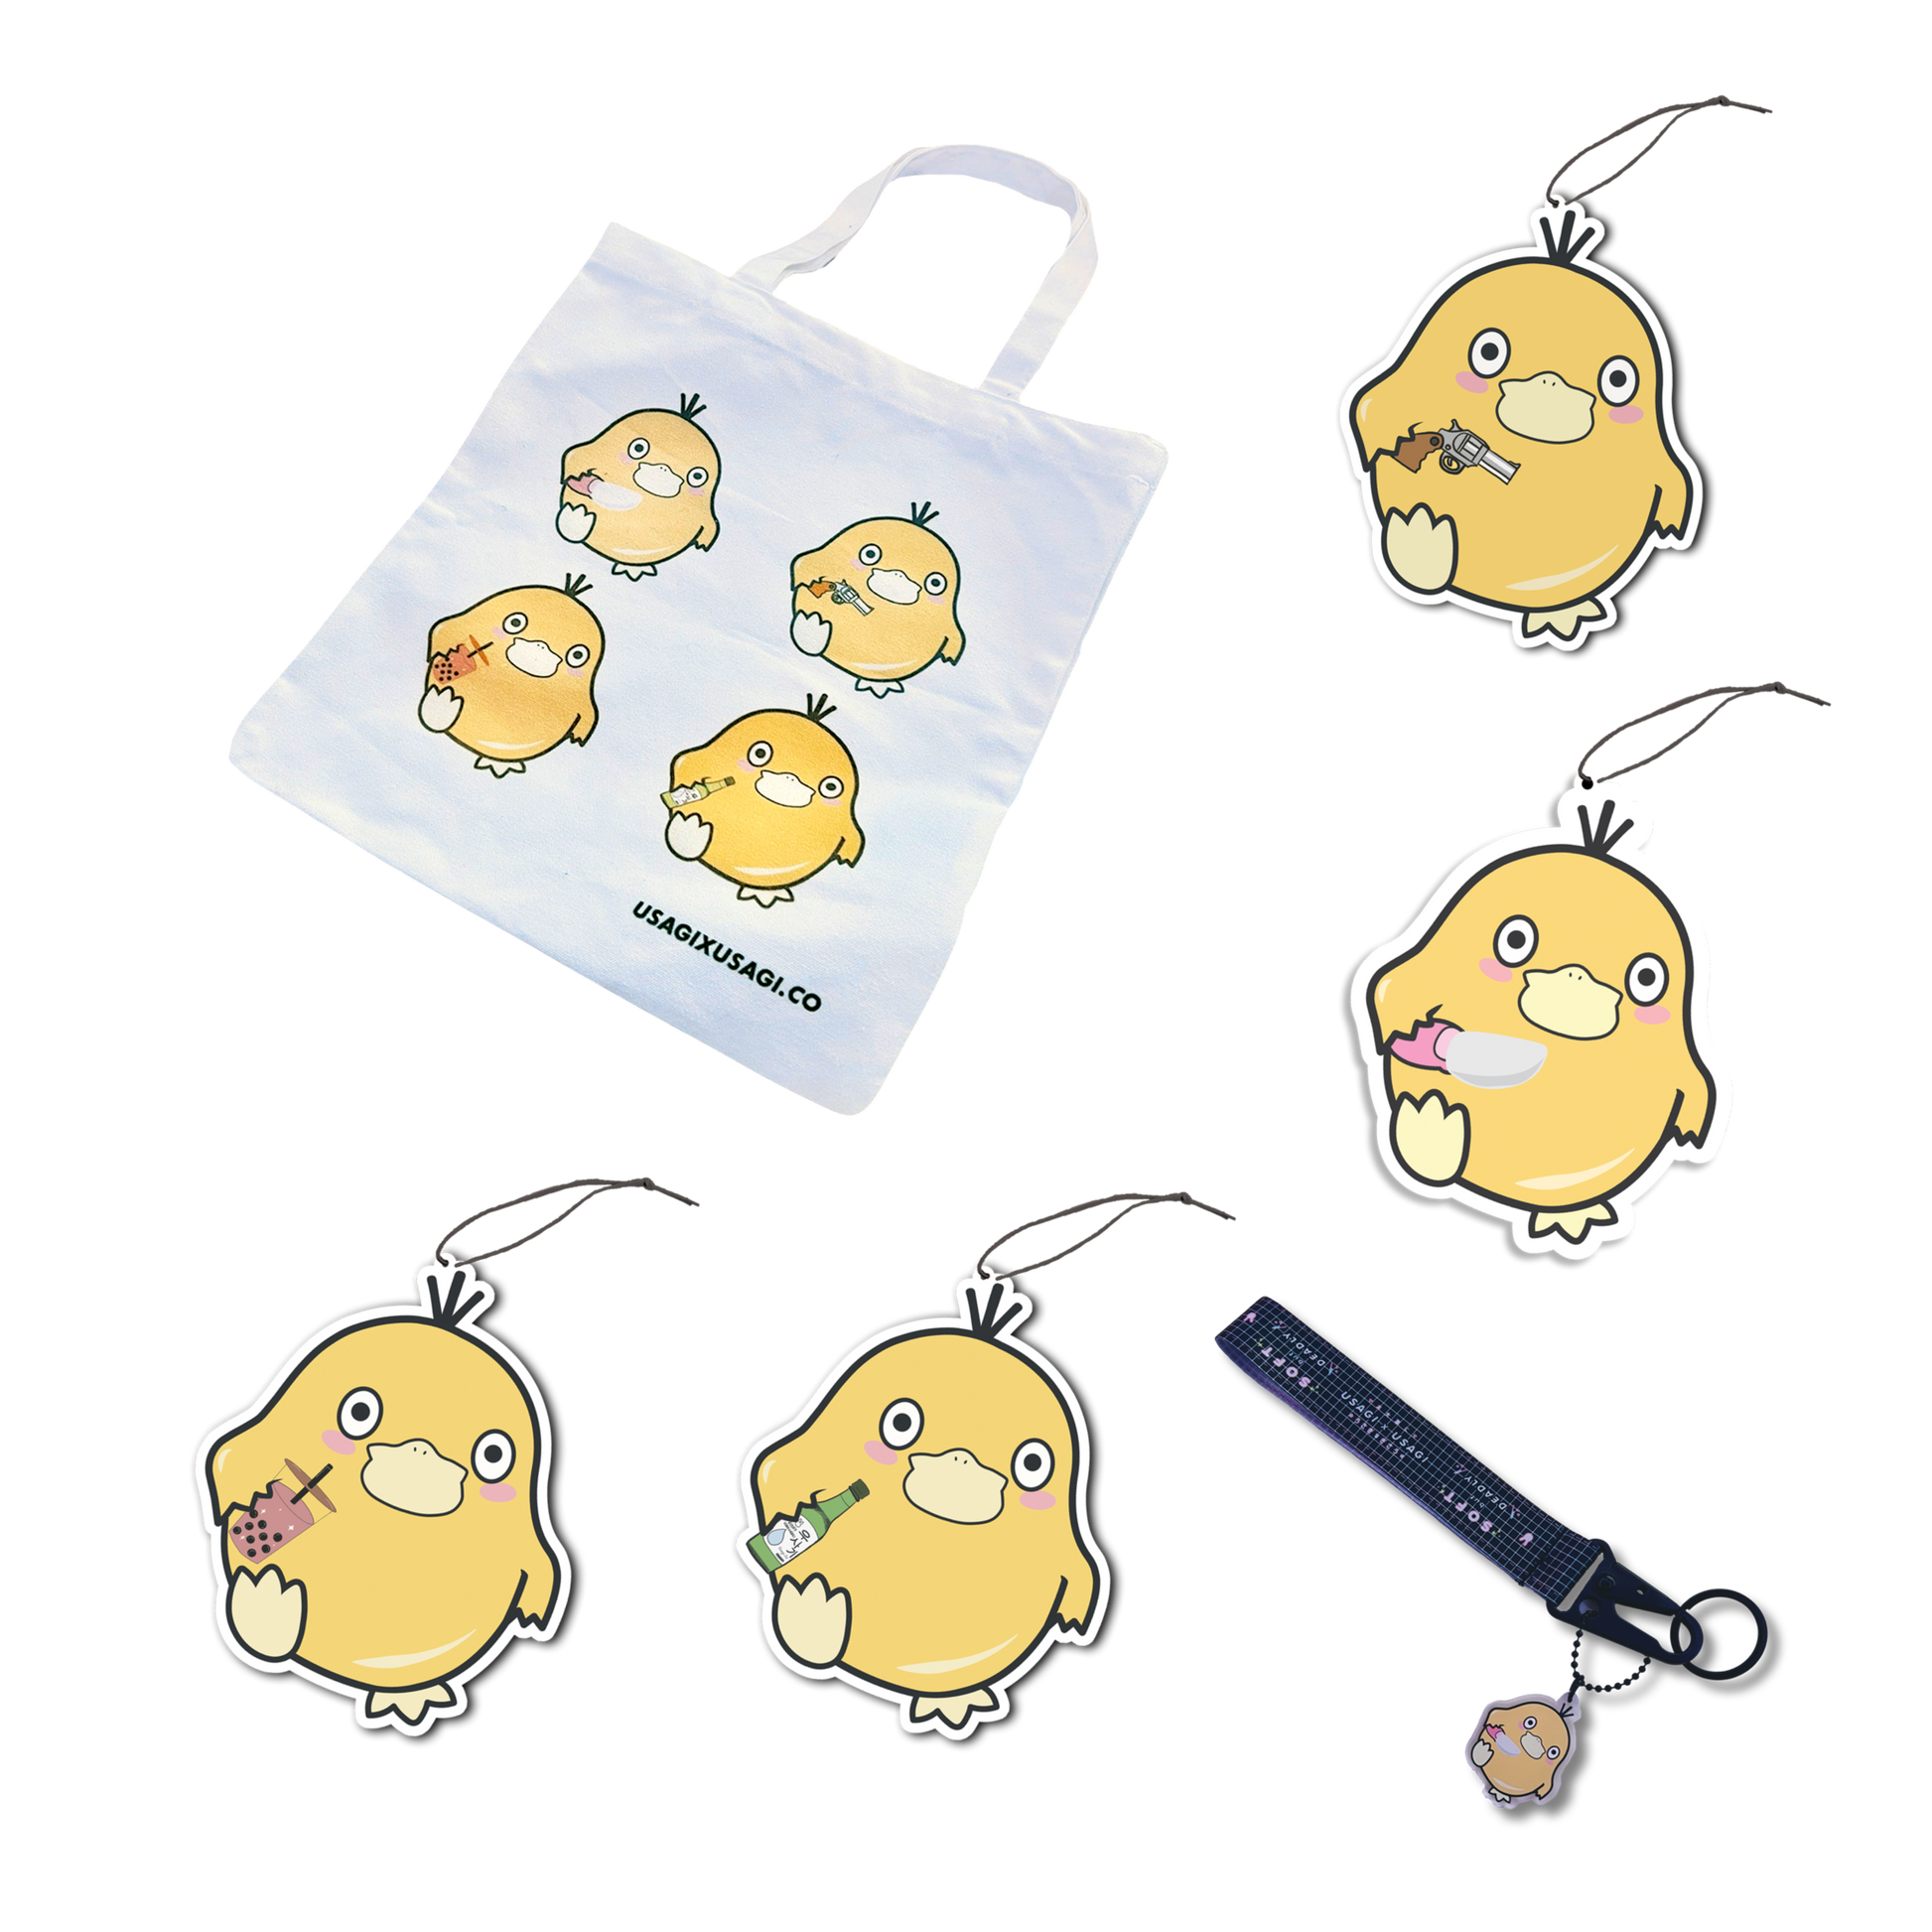 Duck with Knife, Boba, Soju, and Gun Designs on Canvas Tote Bag, Air Fresheners, and Keychain